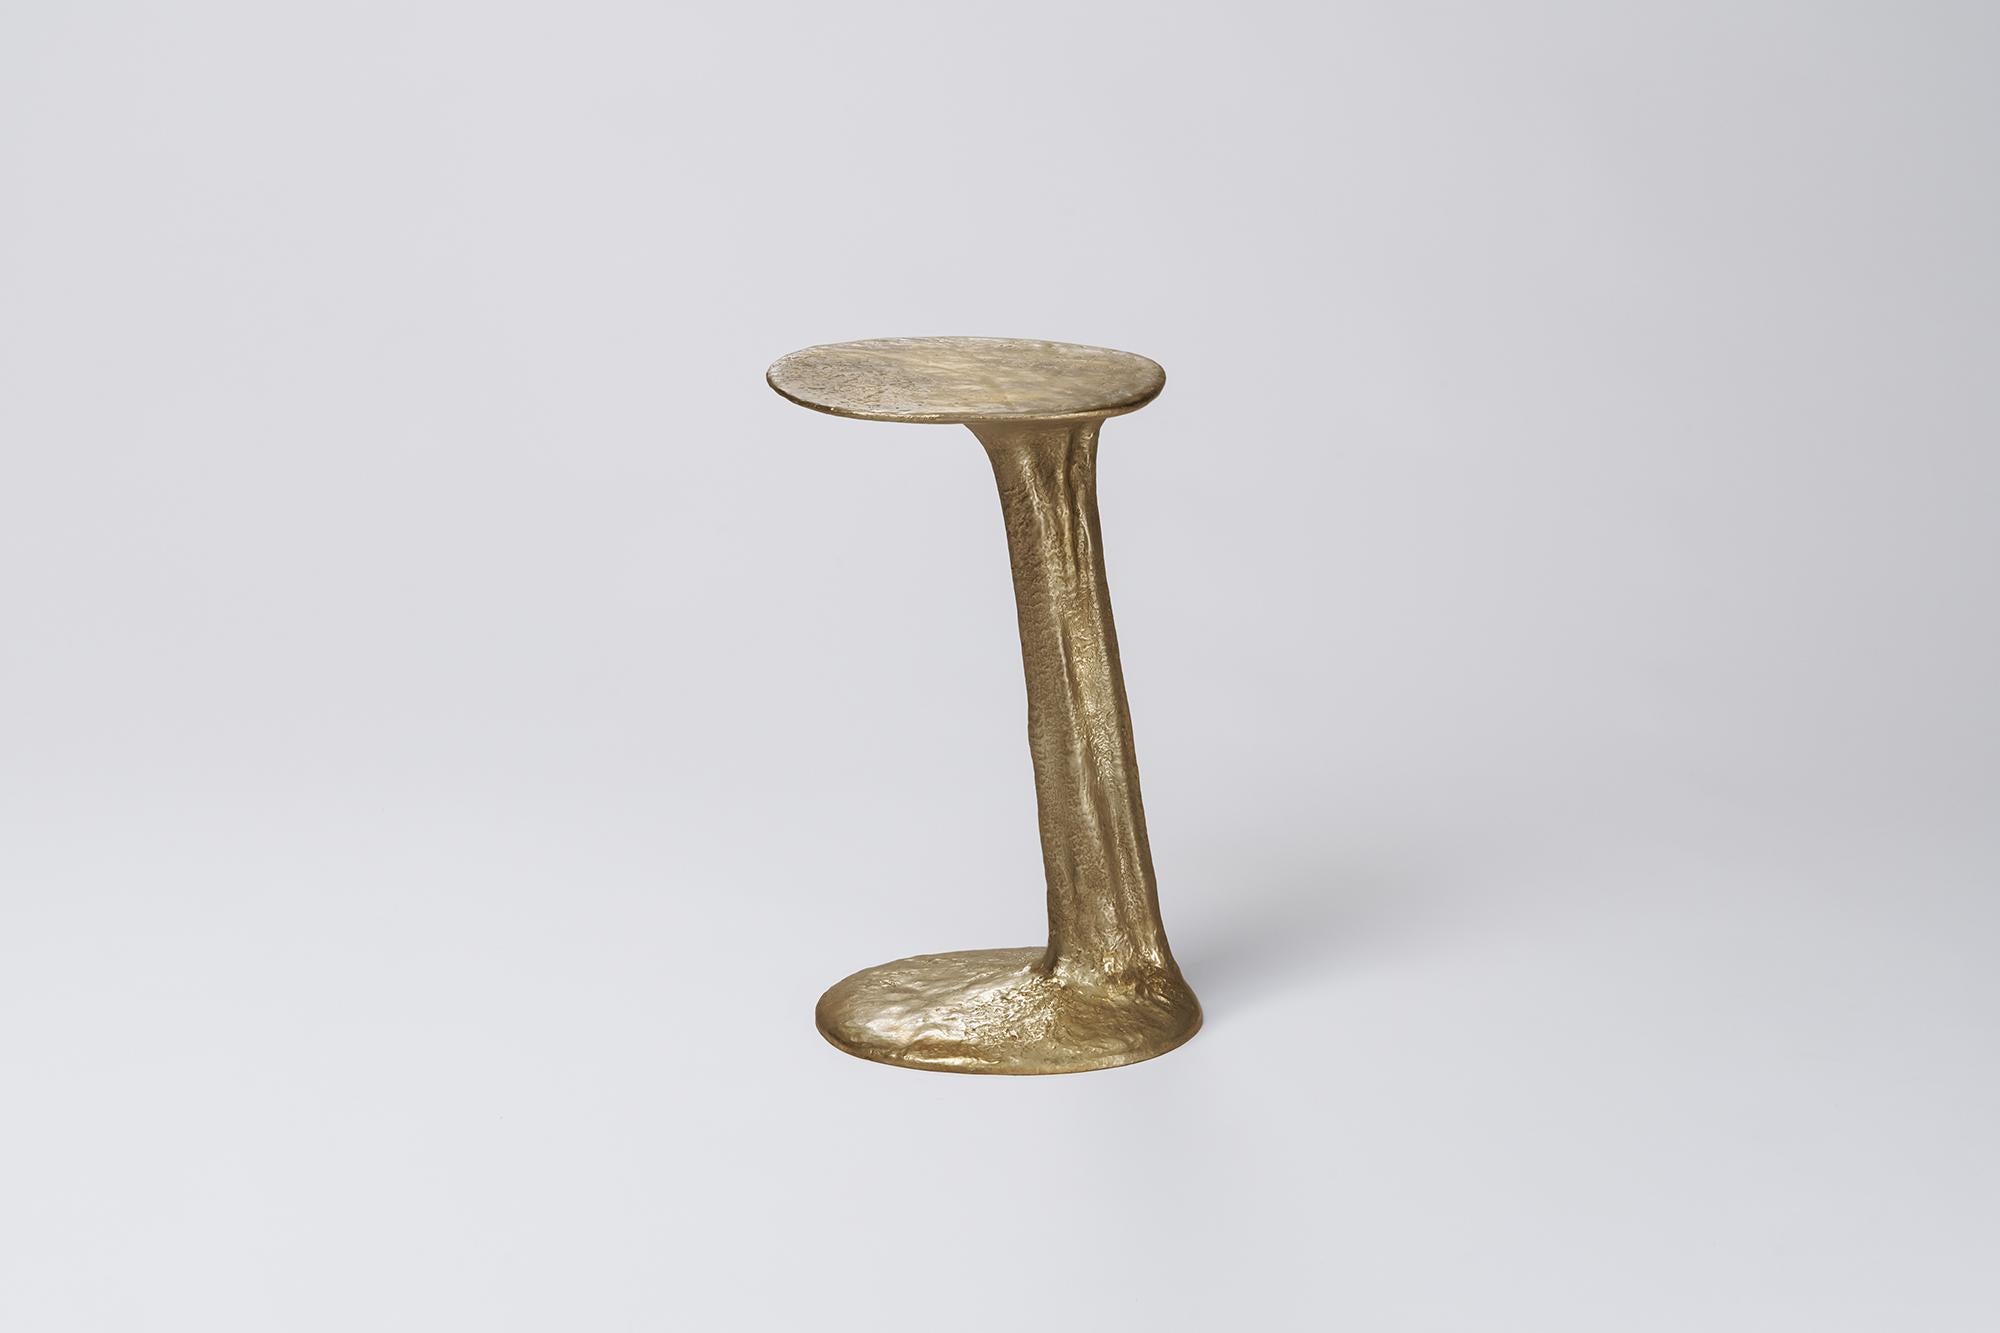 Natural Cast Brass Lava Small Side Table by Atelier V&F
Dimensions: D 35 x W 30 x H 53 cm. 
Materials: Cast brass with a natural finish.

Available in different finishes (cast, black and silver). Available in two different sizes. Prices may vary.